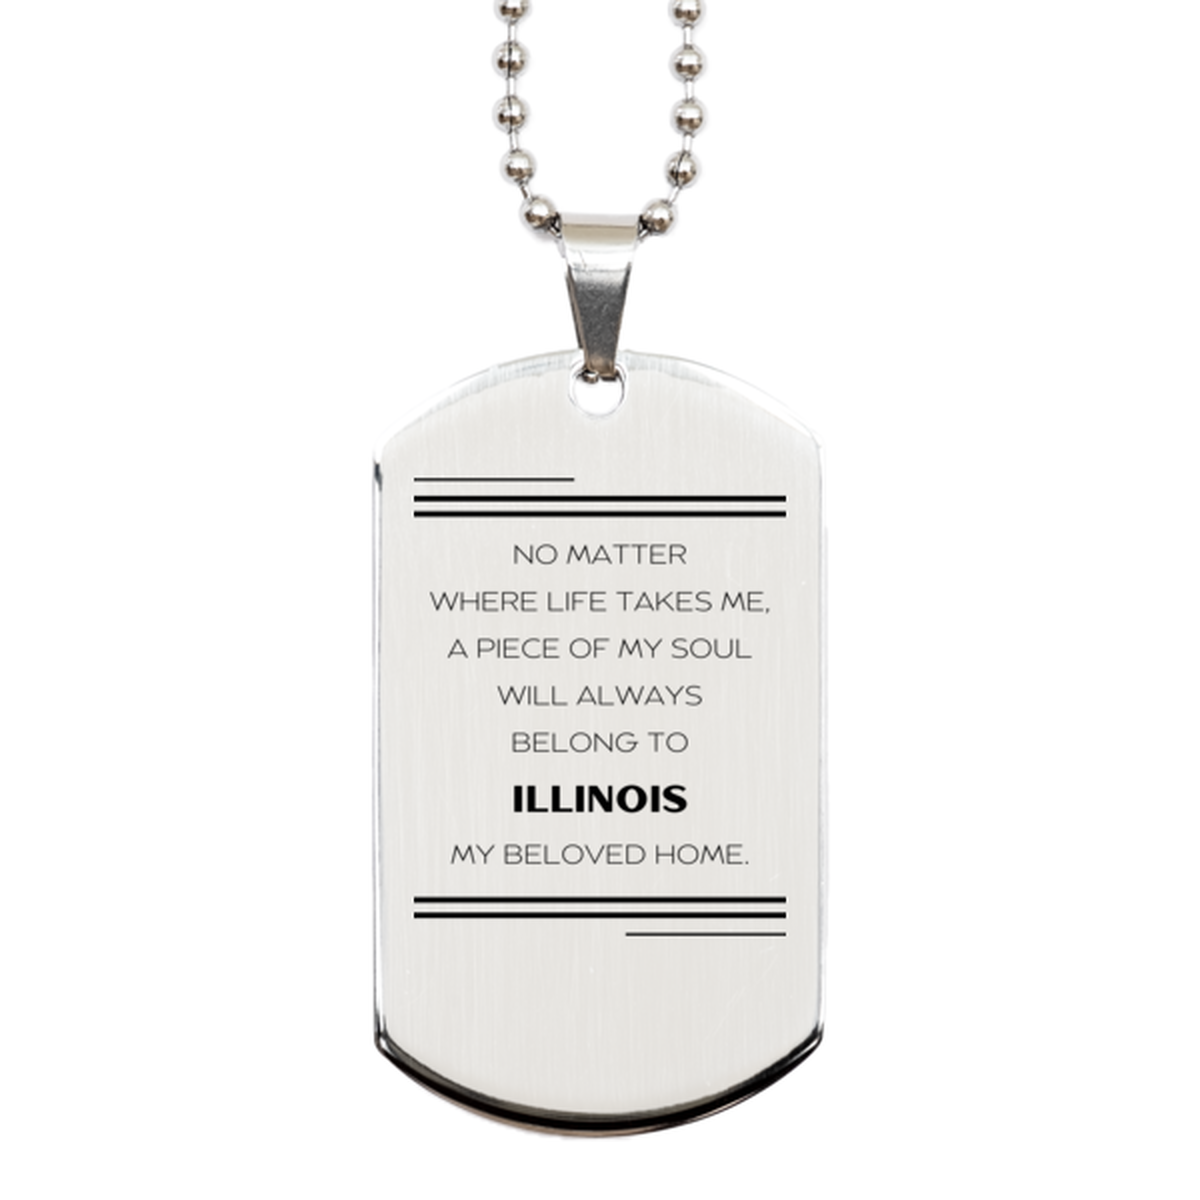 Love Illinois State Gifts, My soul will always belong to Illinois, Proud Silver Dog Tag, Birthday Unique Gifts For Illinois Men, Women, Friends